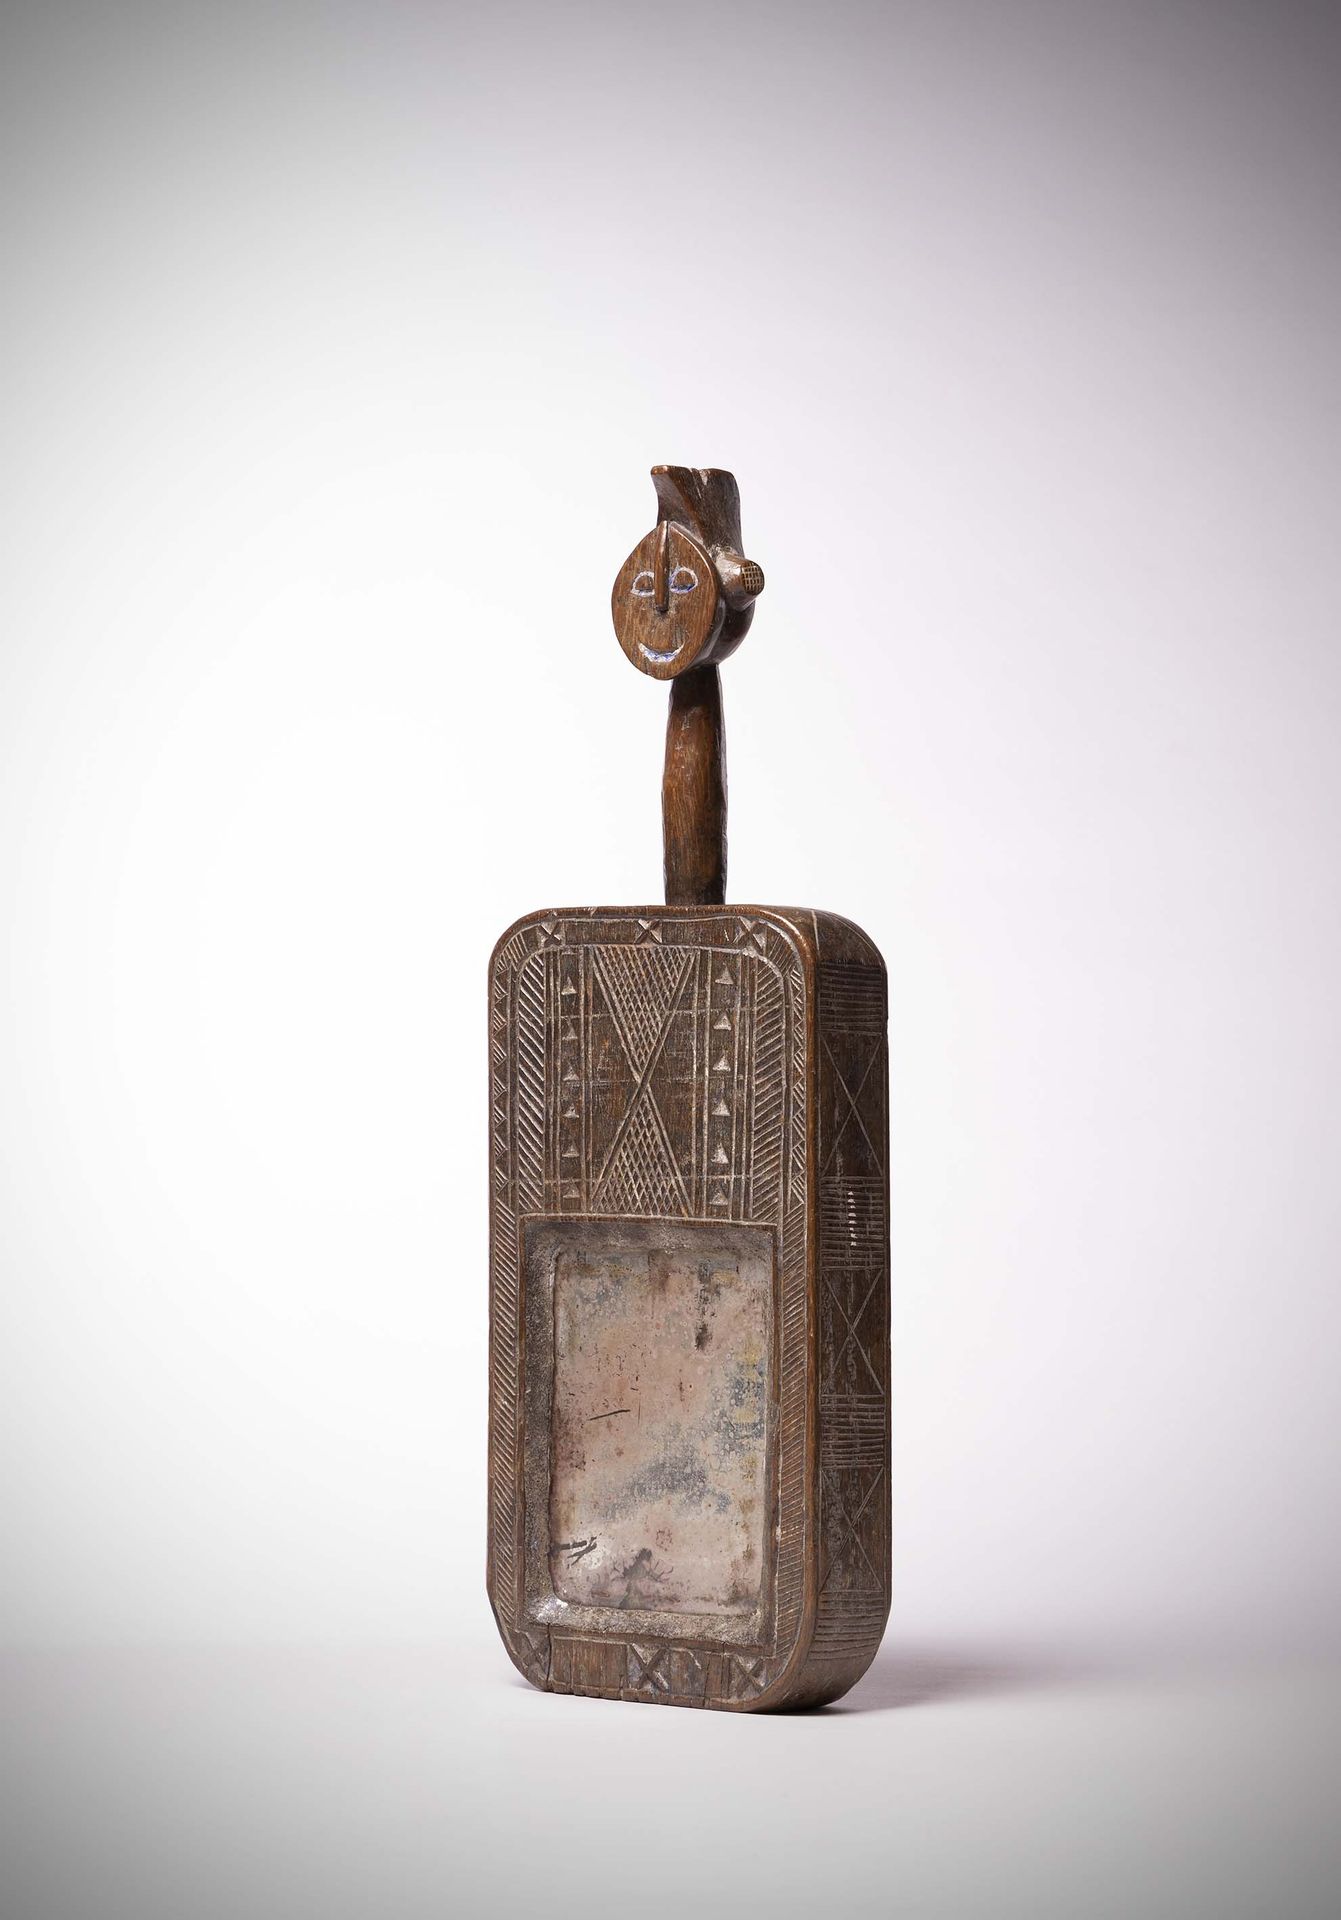 Null Igala

(Nigeria) Mirror surmounted by a head with a long neck.

The flatten&hellip;